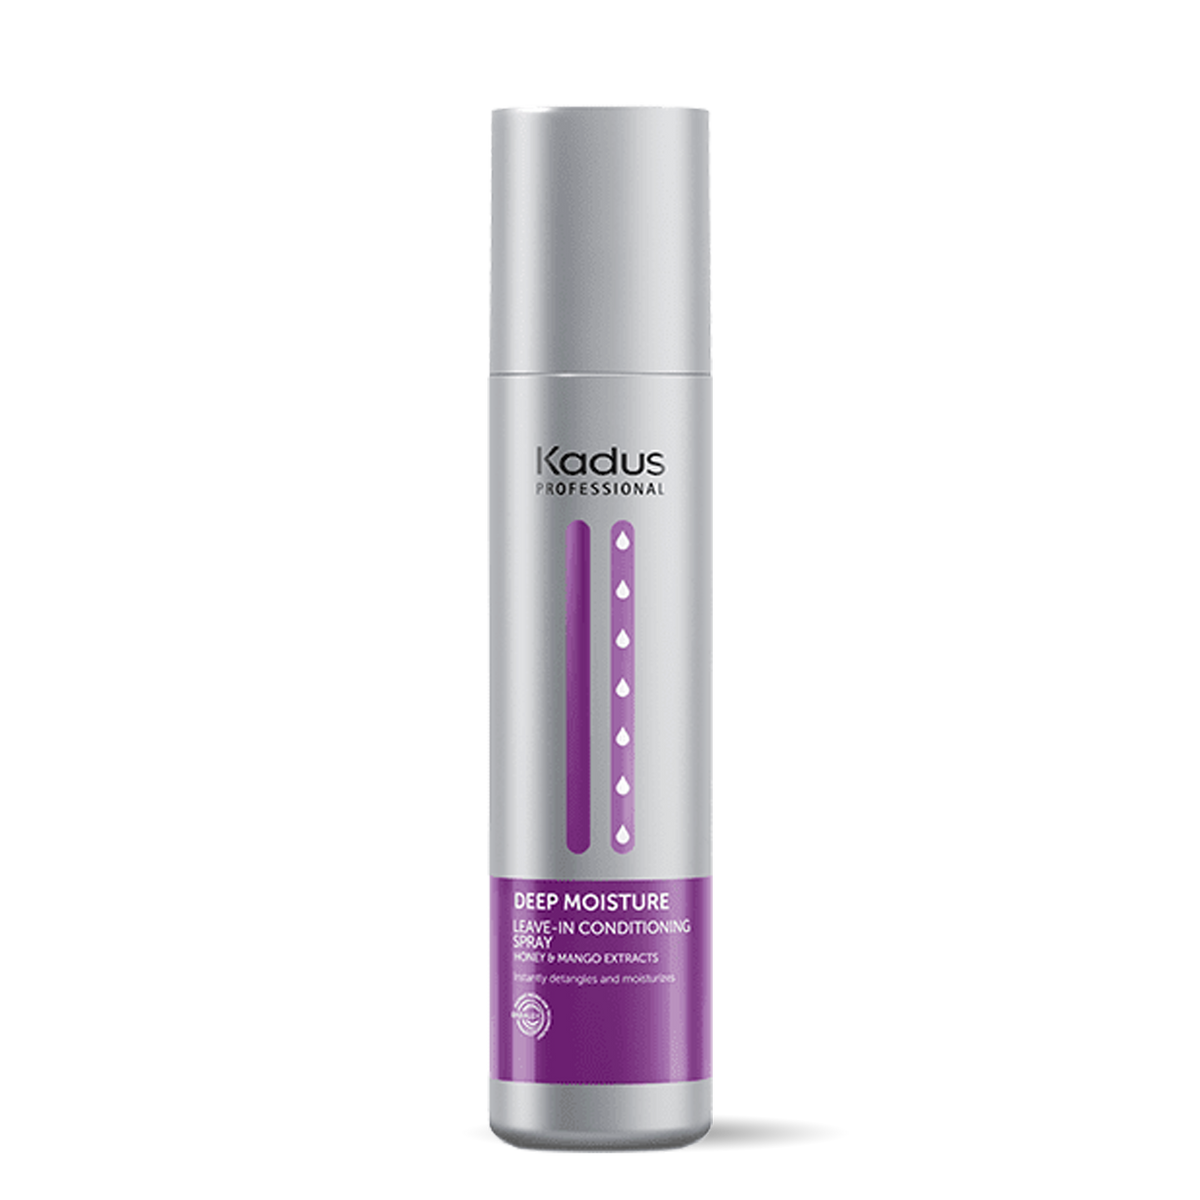 Kadus Deep Moisture Conditioning Spray 250ml - by Kadus Professionals |ProCare Outlet|